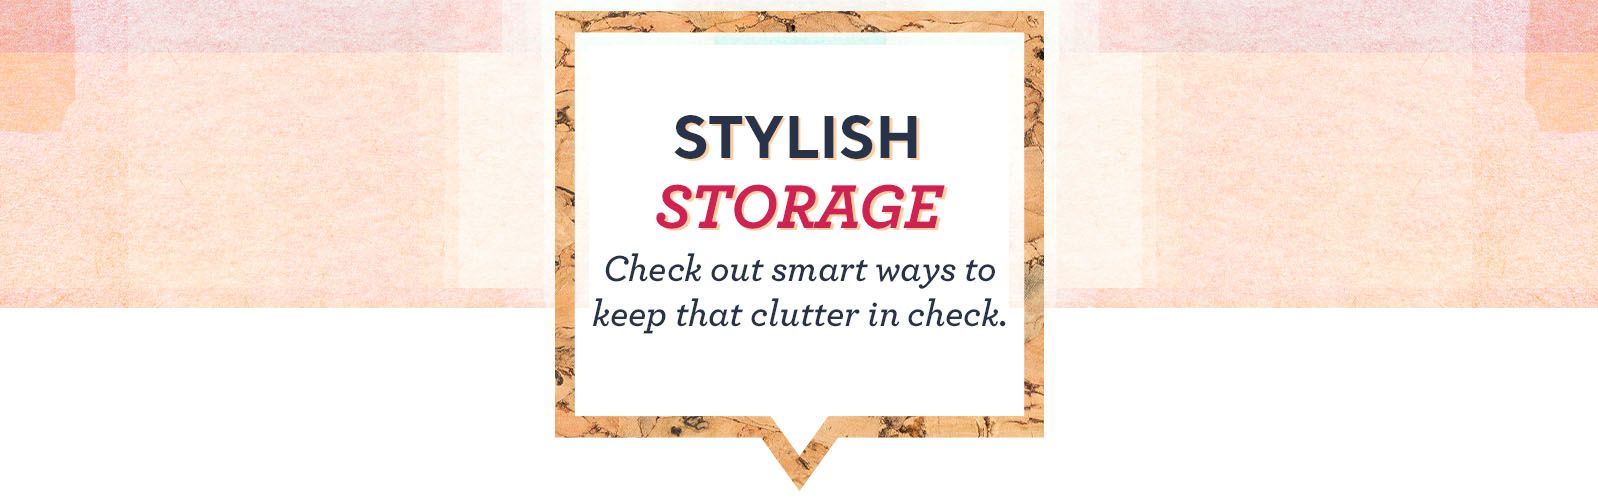 Stylish Storage. Check out smart ways to keep that clutter in check.